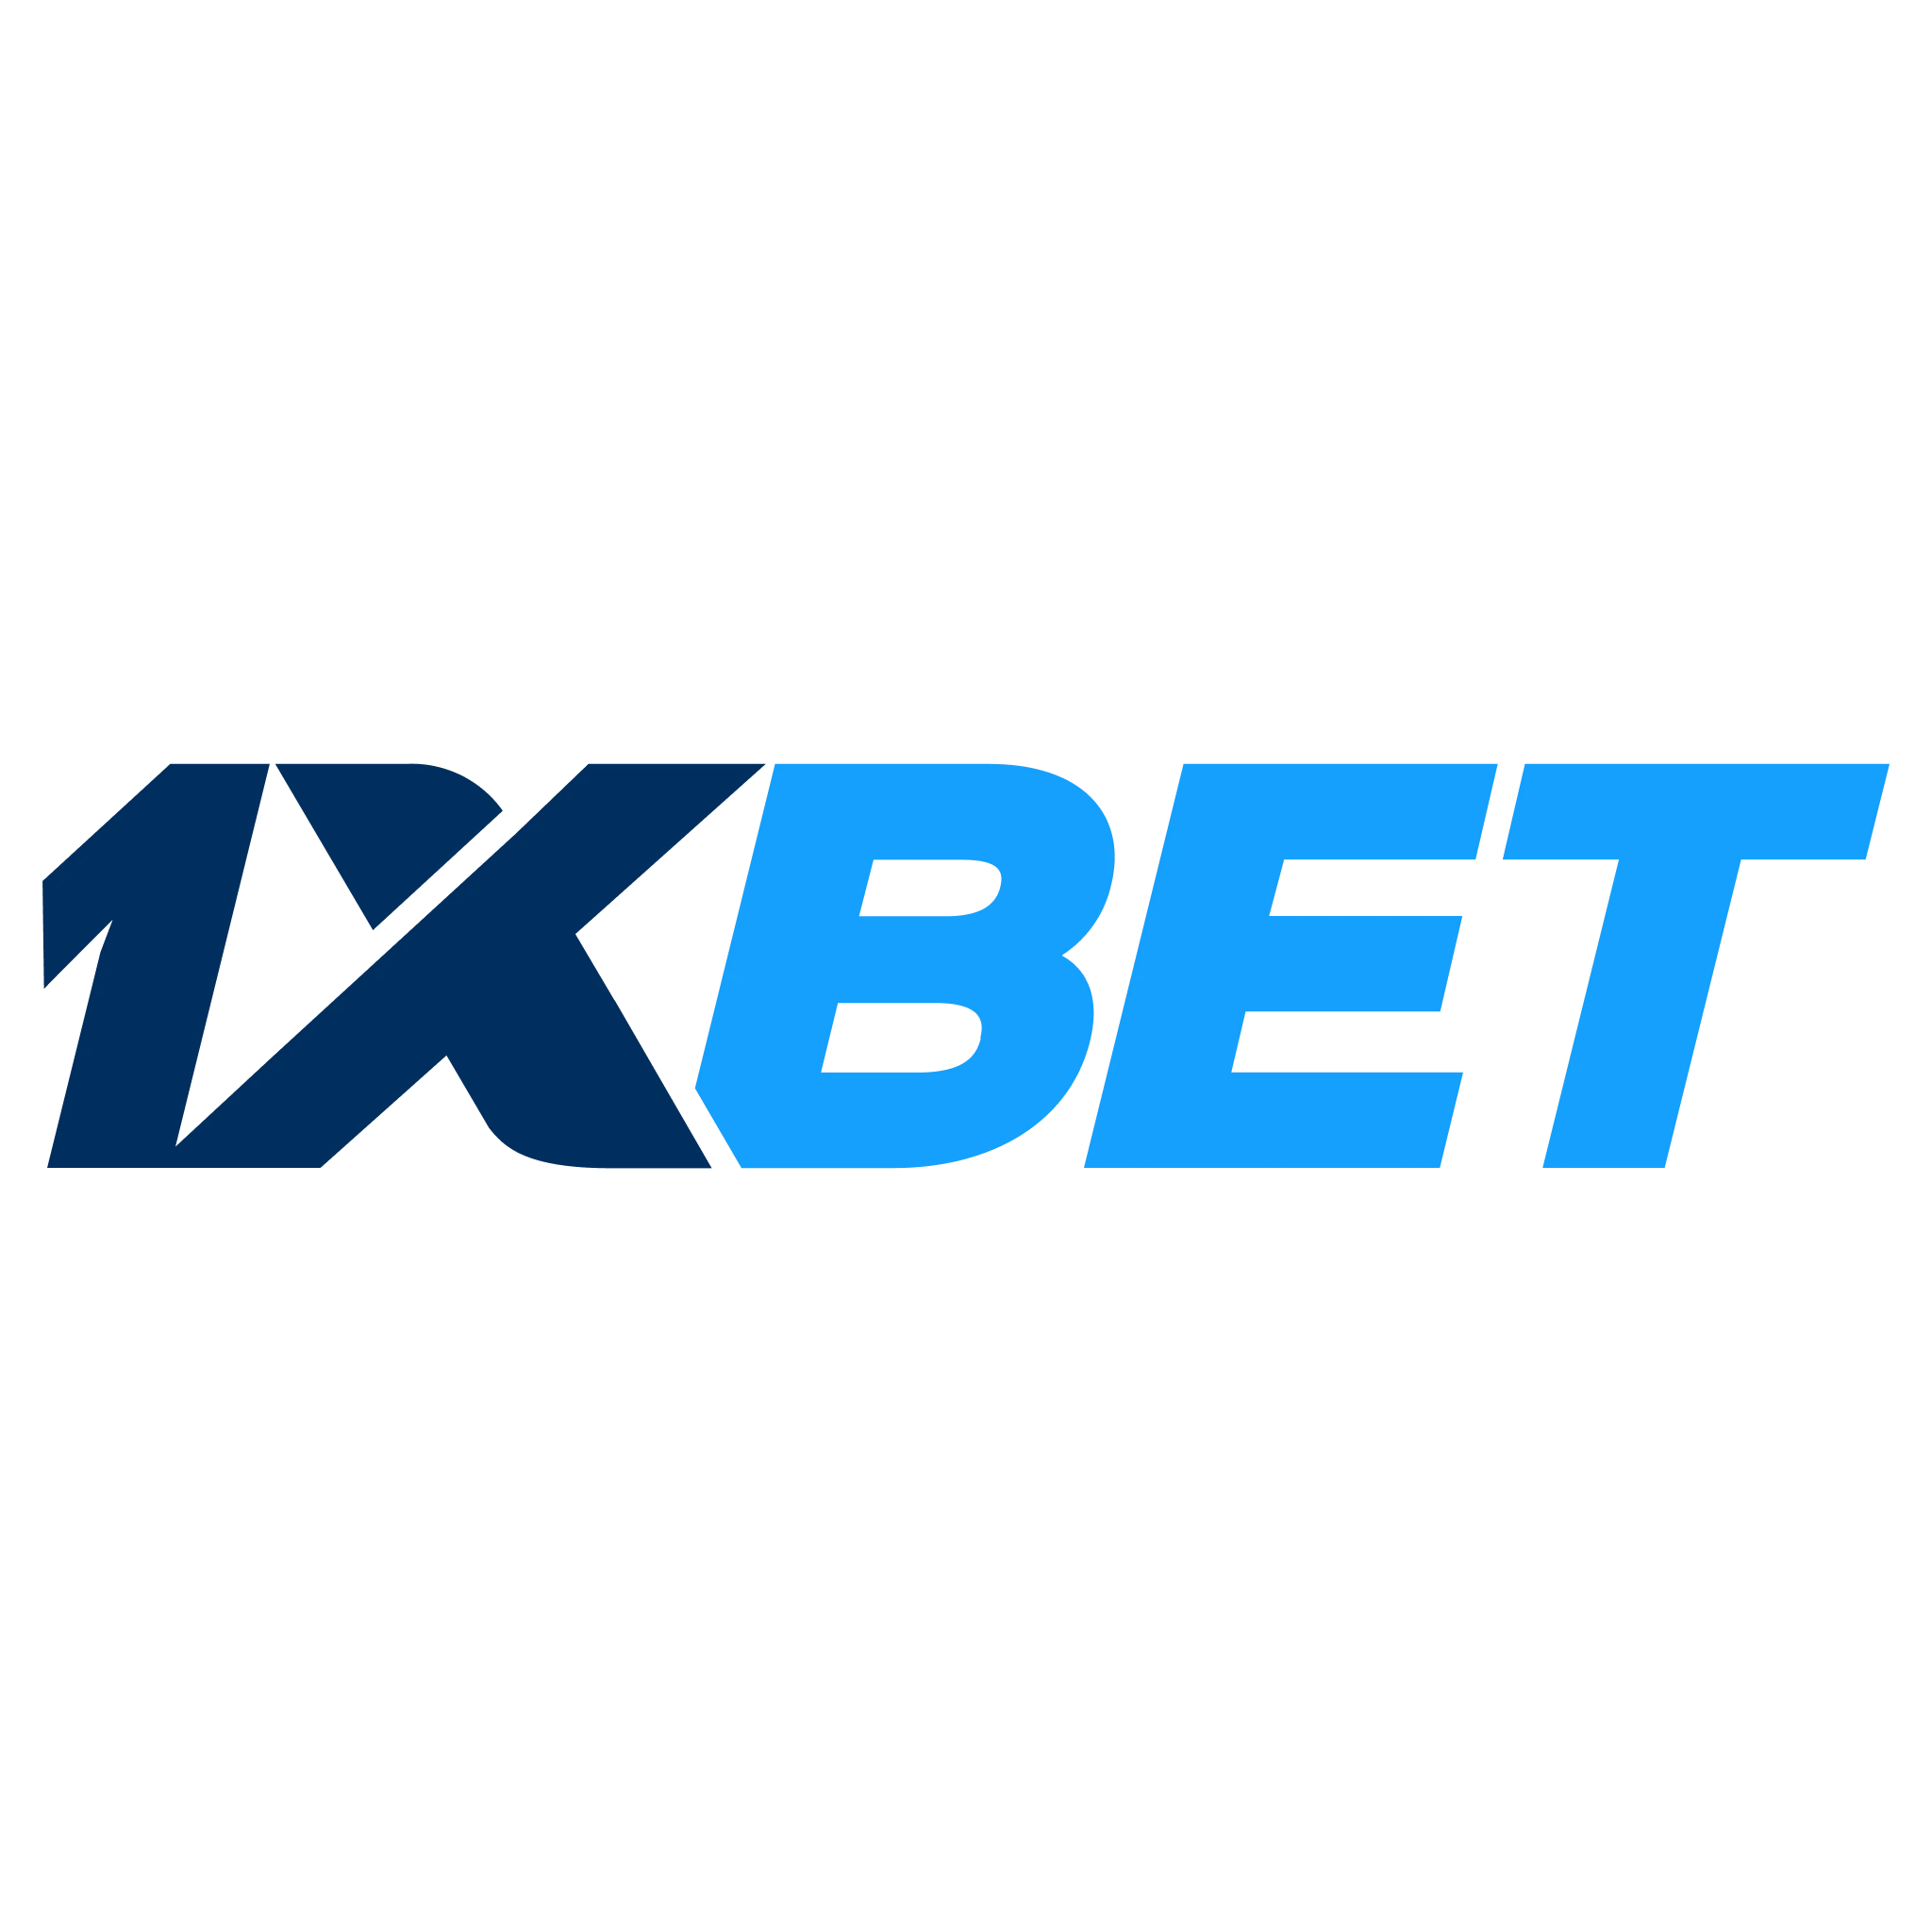 You have unique opportunity to win using 1xBet for cricket betting.